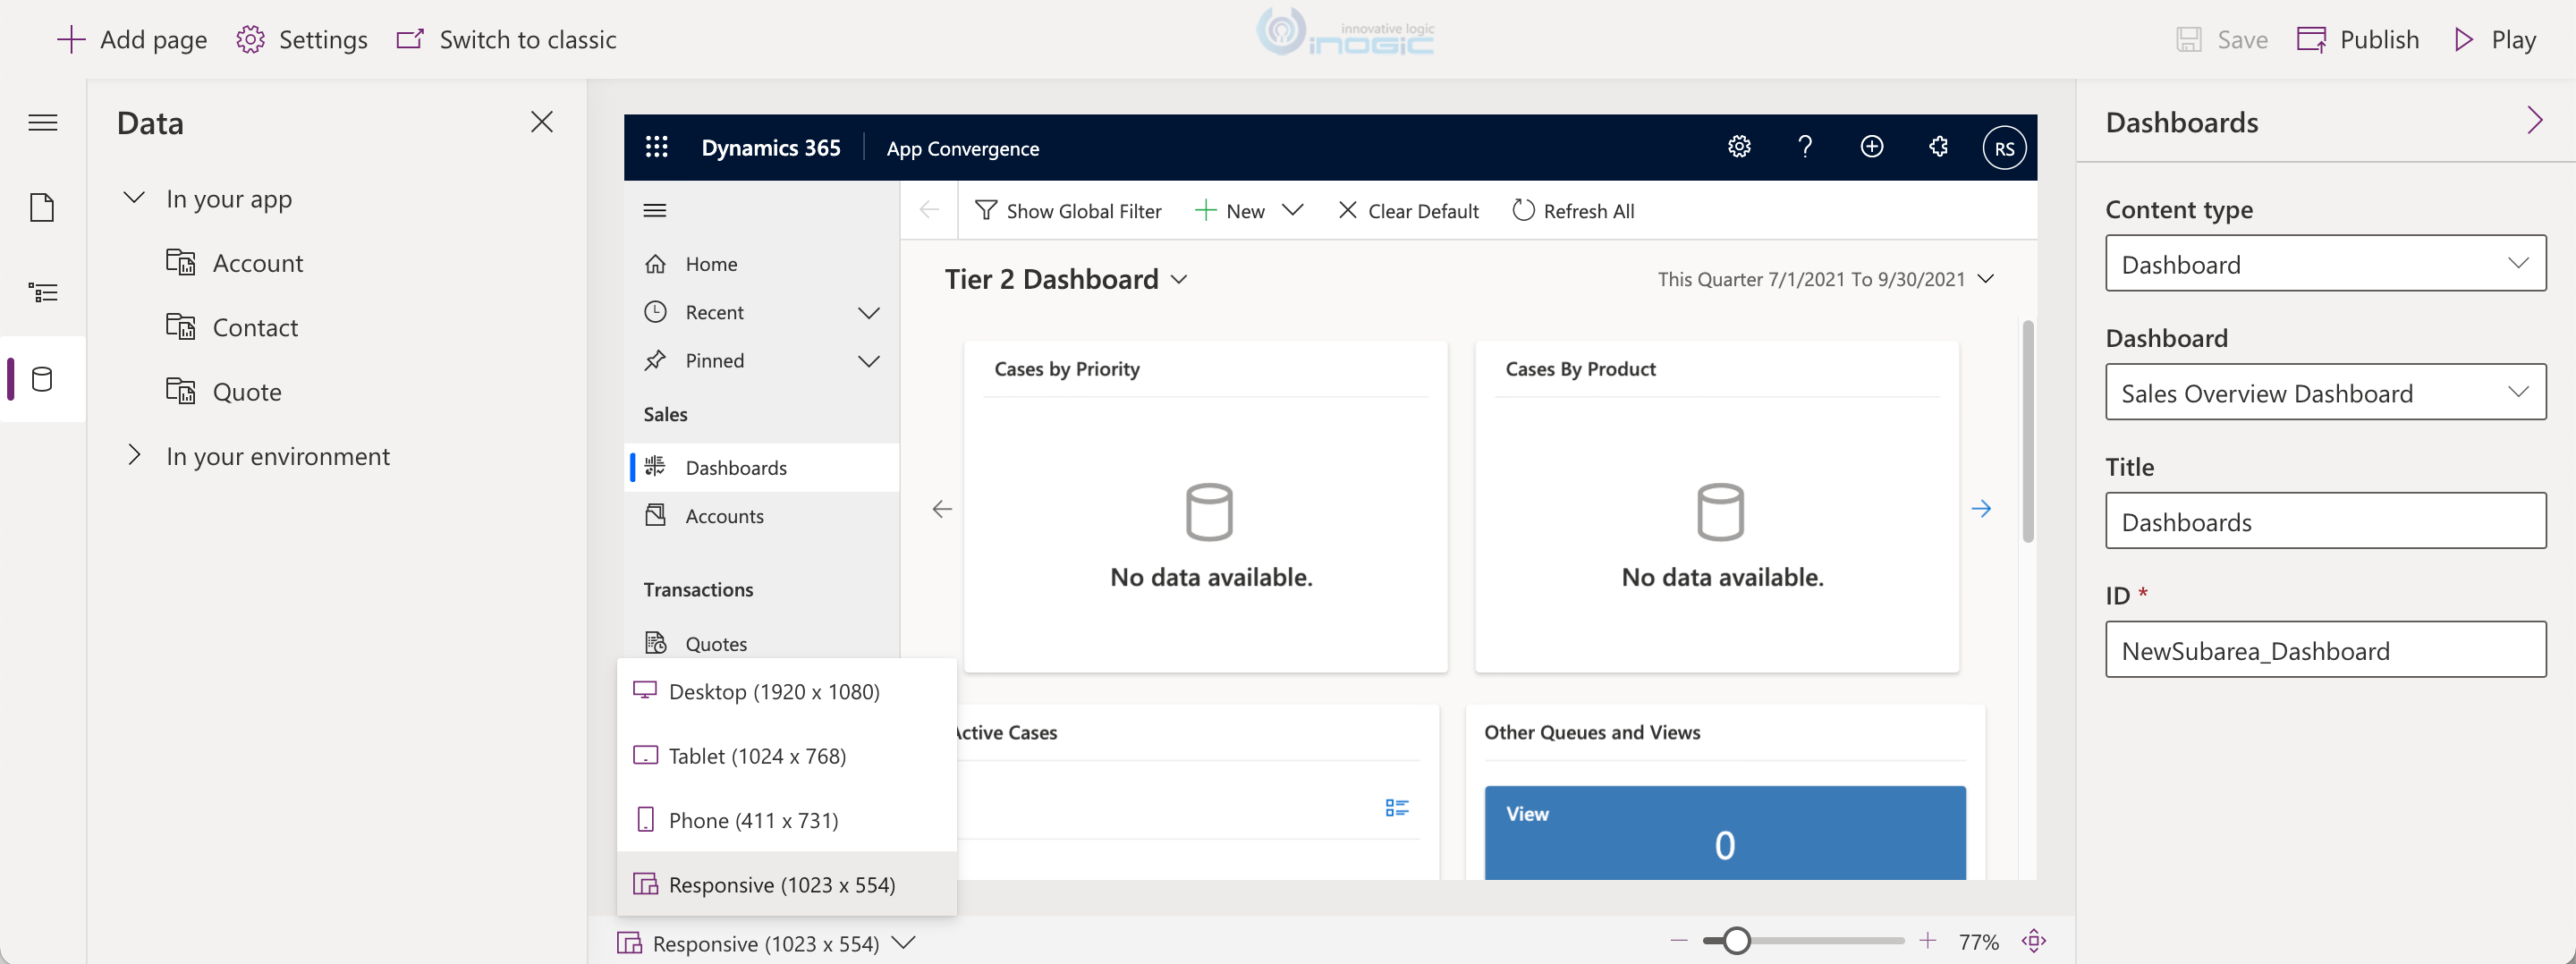 New maker experience for App designing in Dataverse and Dynamics 365 CRM